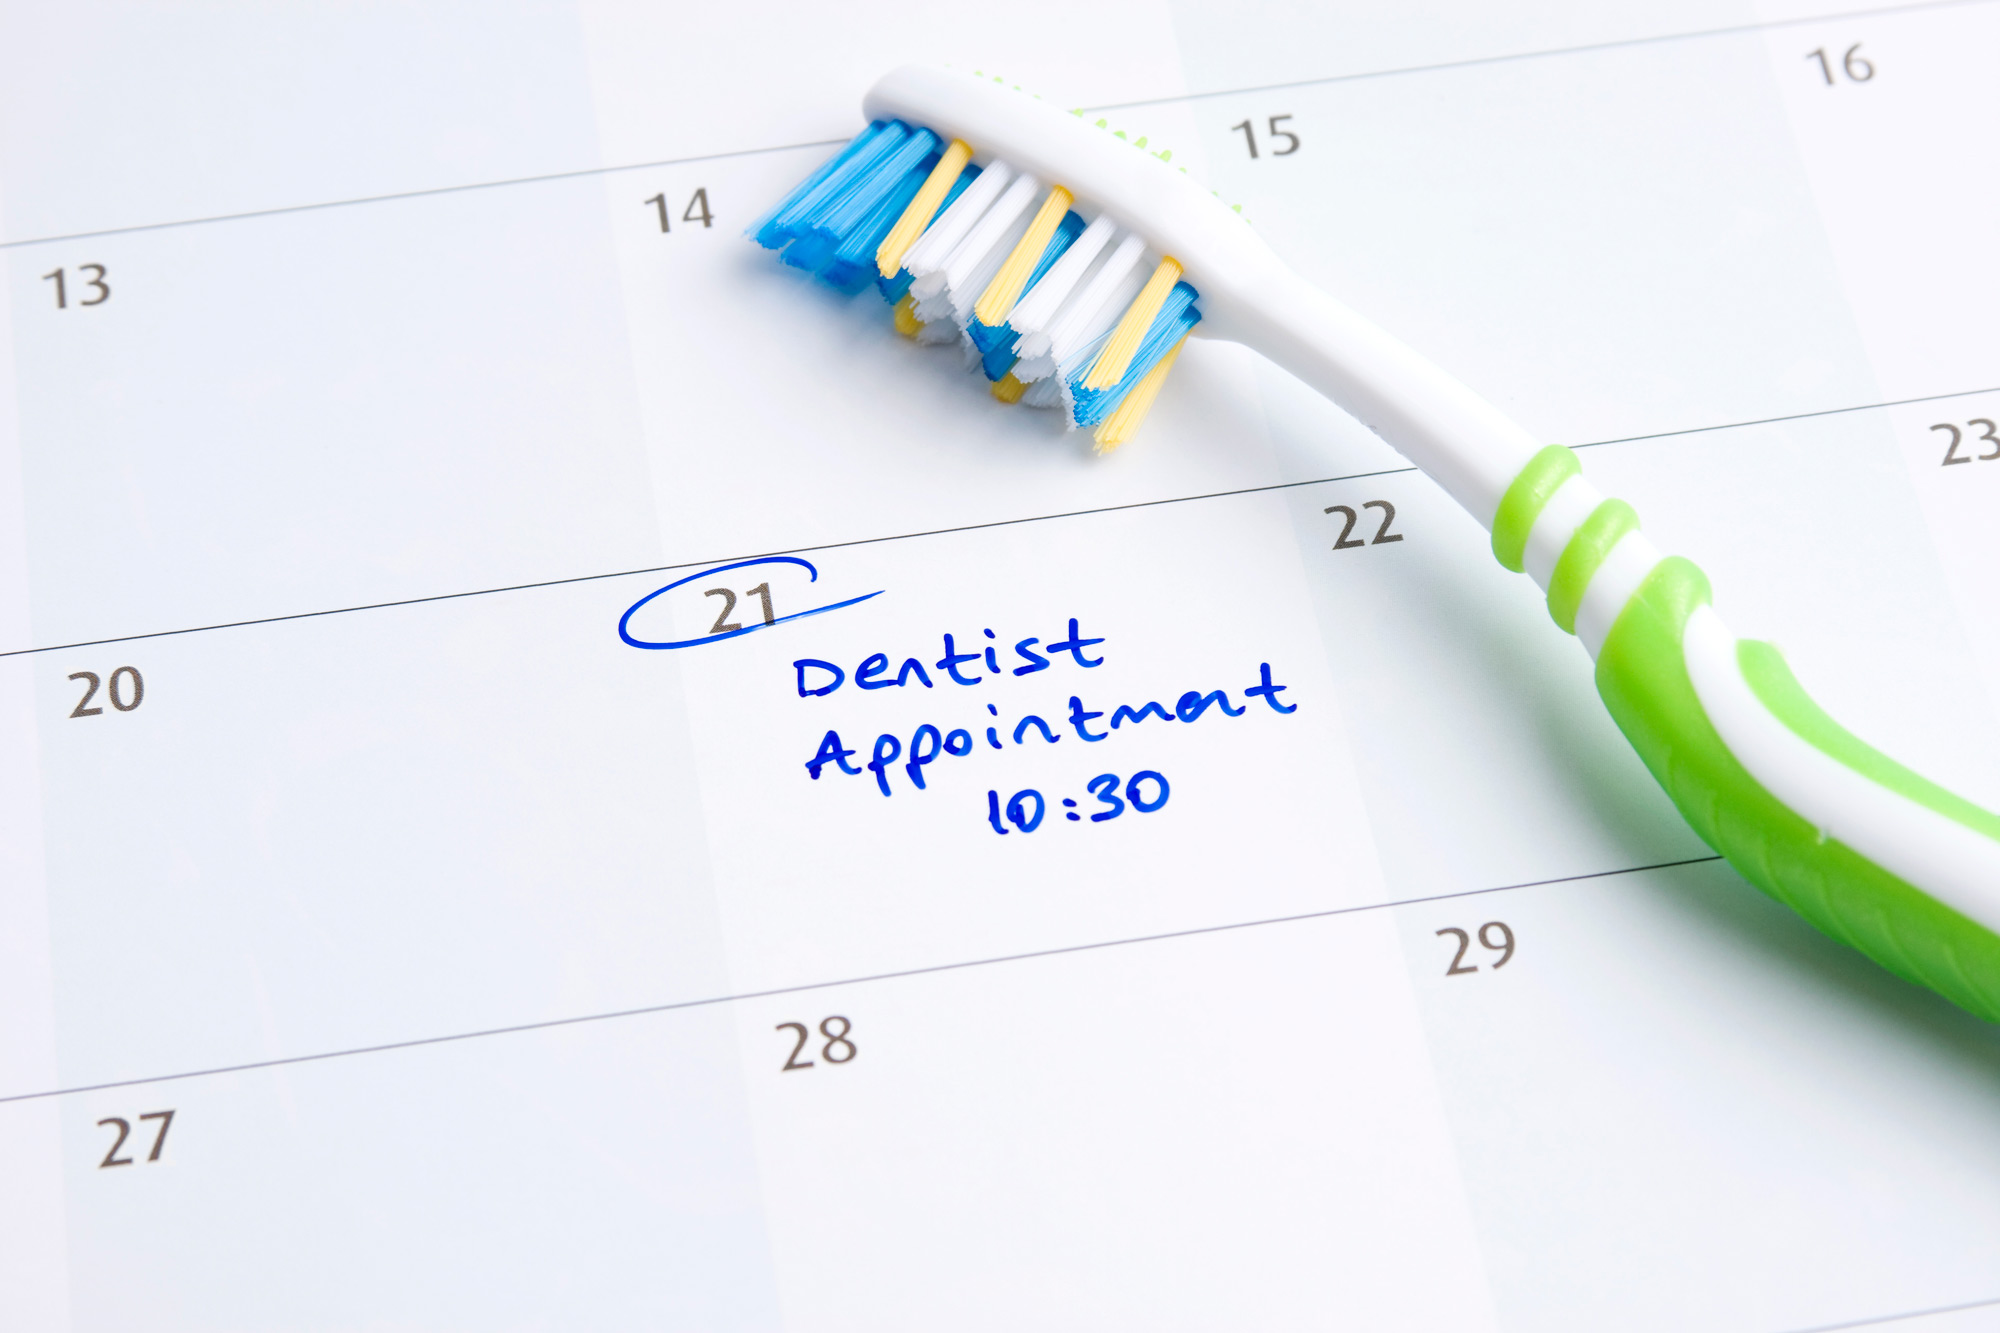 How often should you visit the dentist?